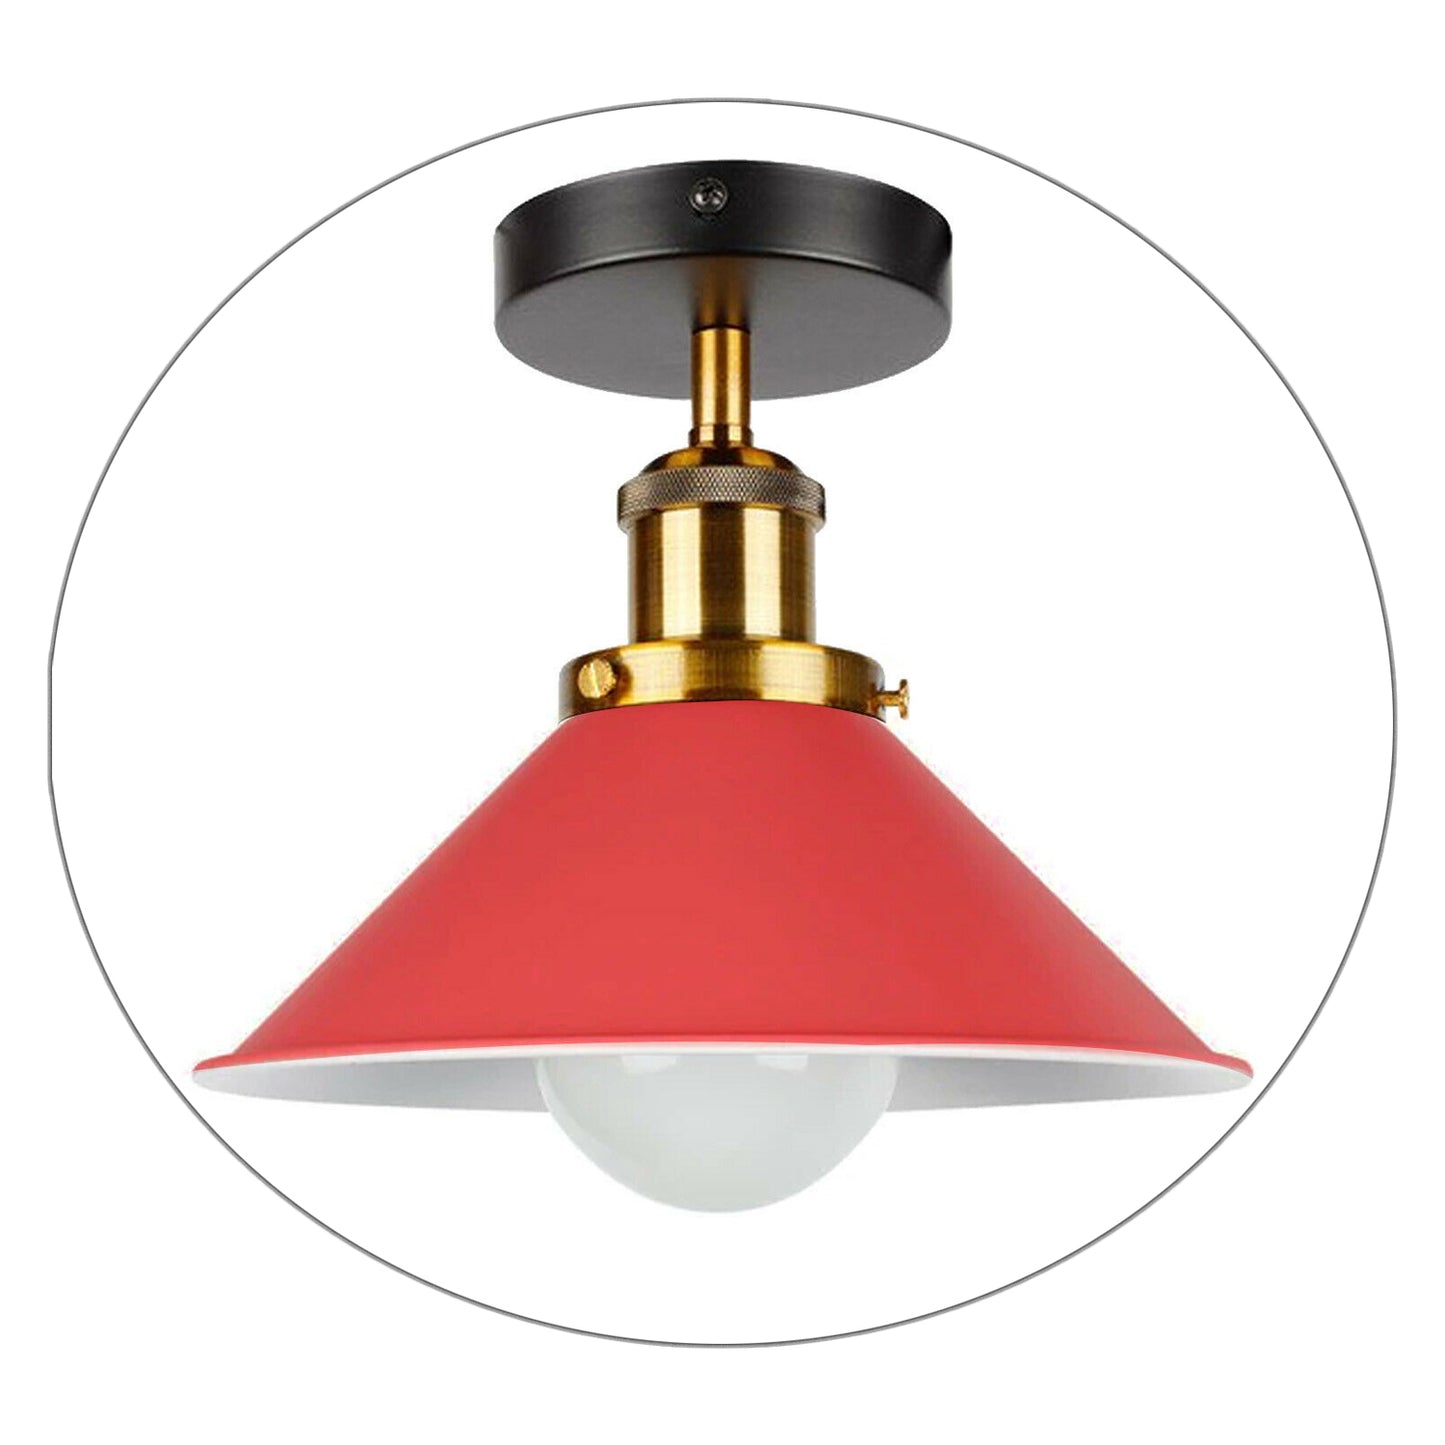  Living Room Red Ceiling Lamp